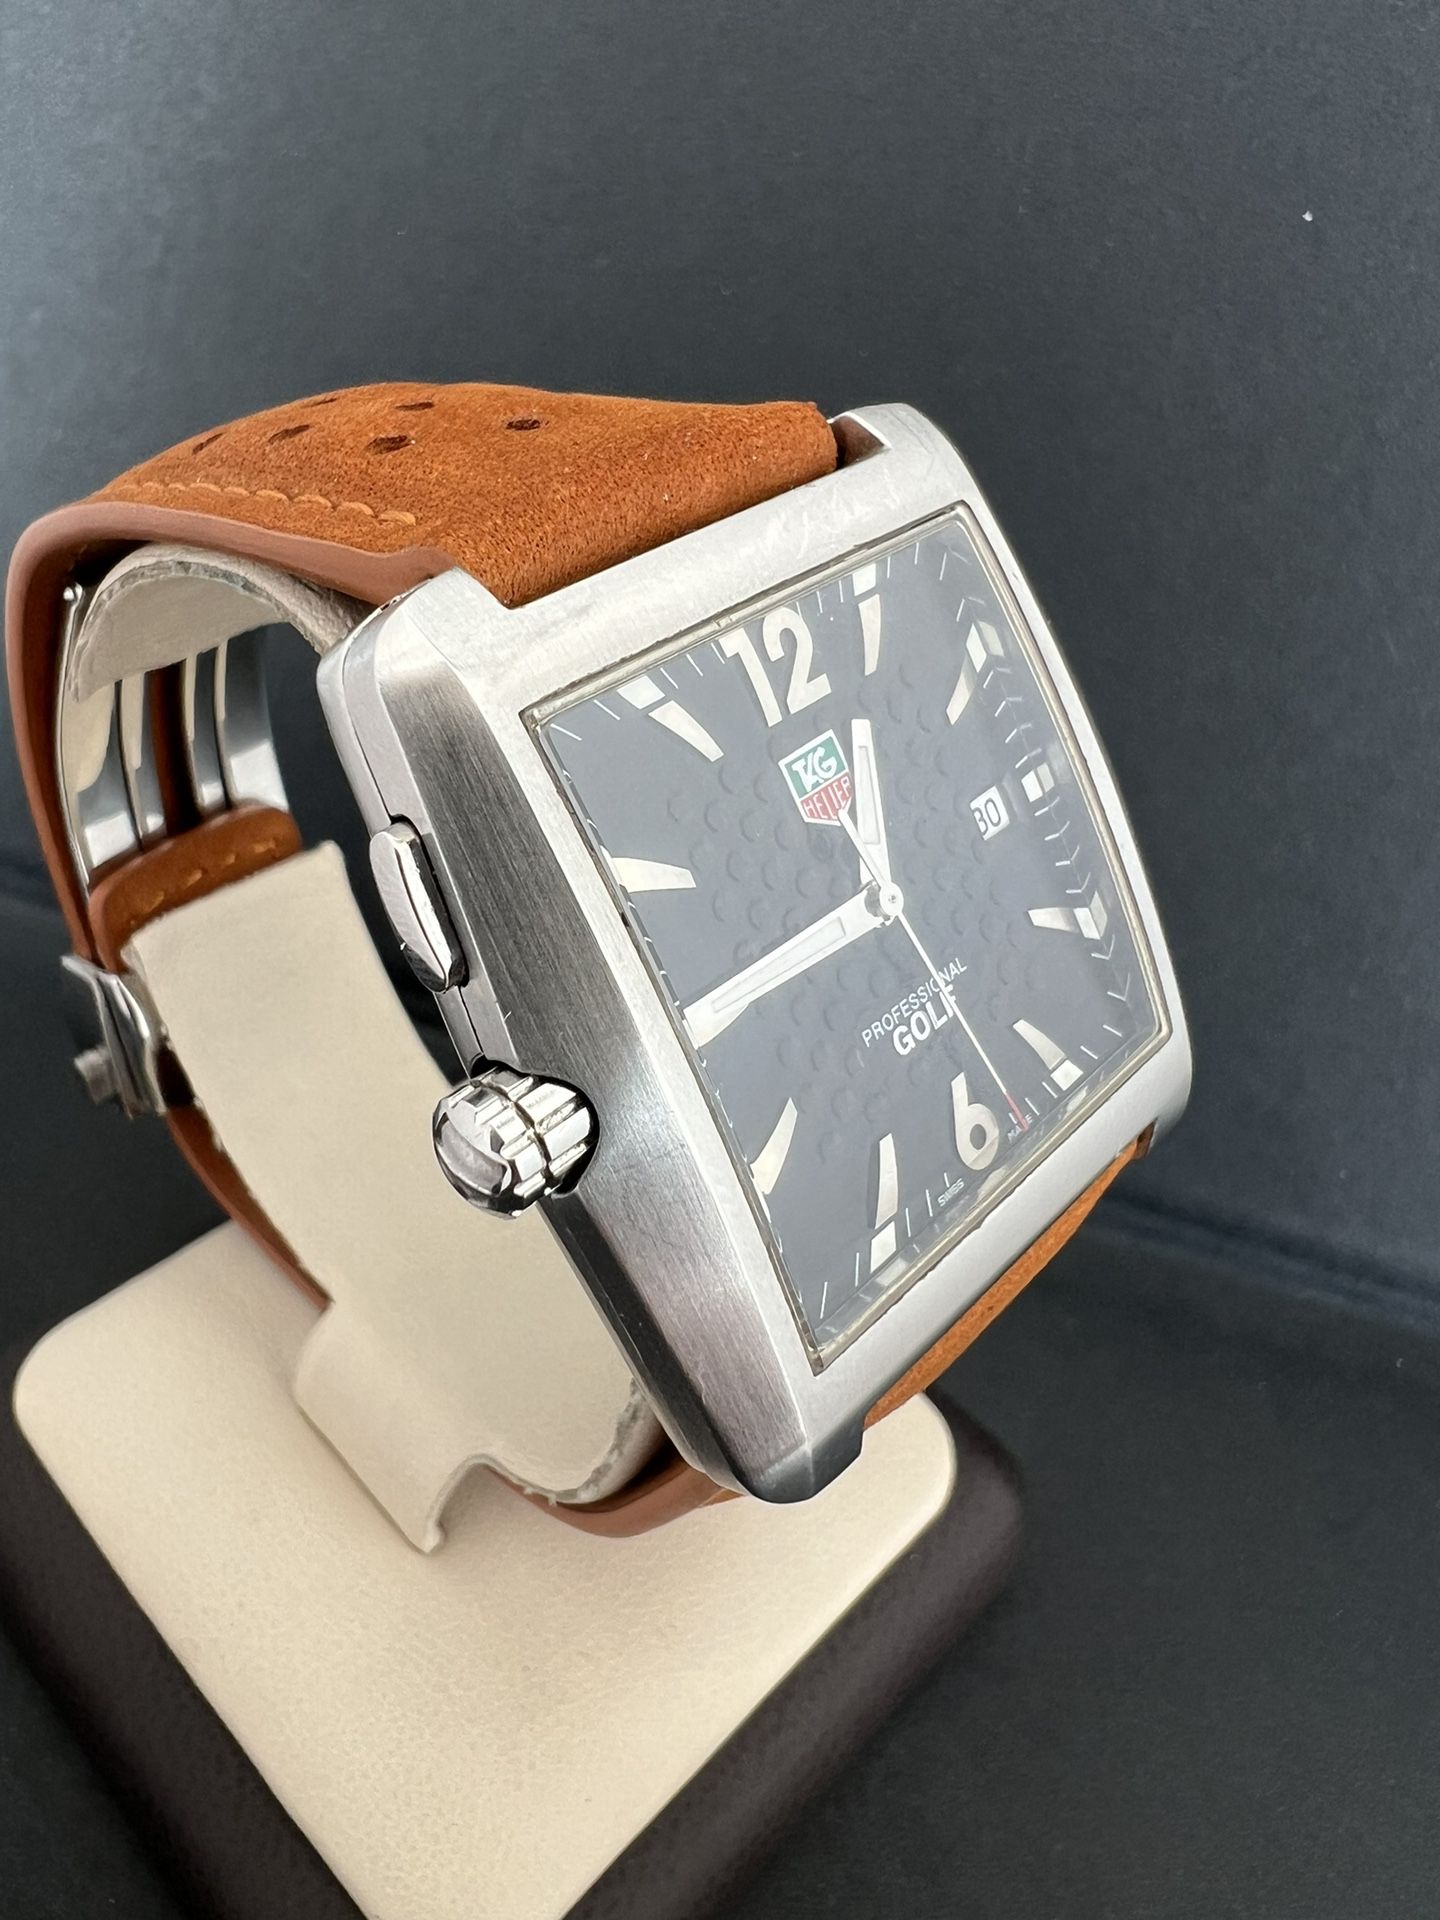 Tag Heuer Professional Golf Men's Wristwatch, Special Edition,Titanium and leather strap. Swiss made quartz Ronda movement. Mint condition.  